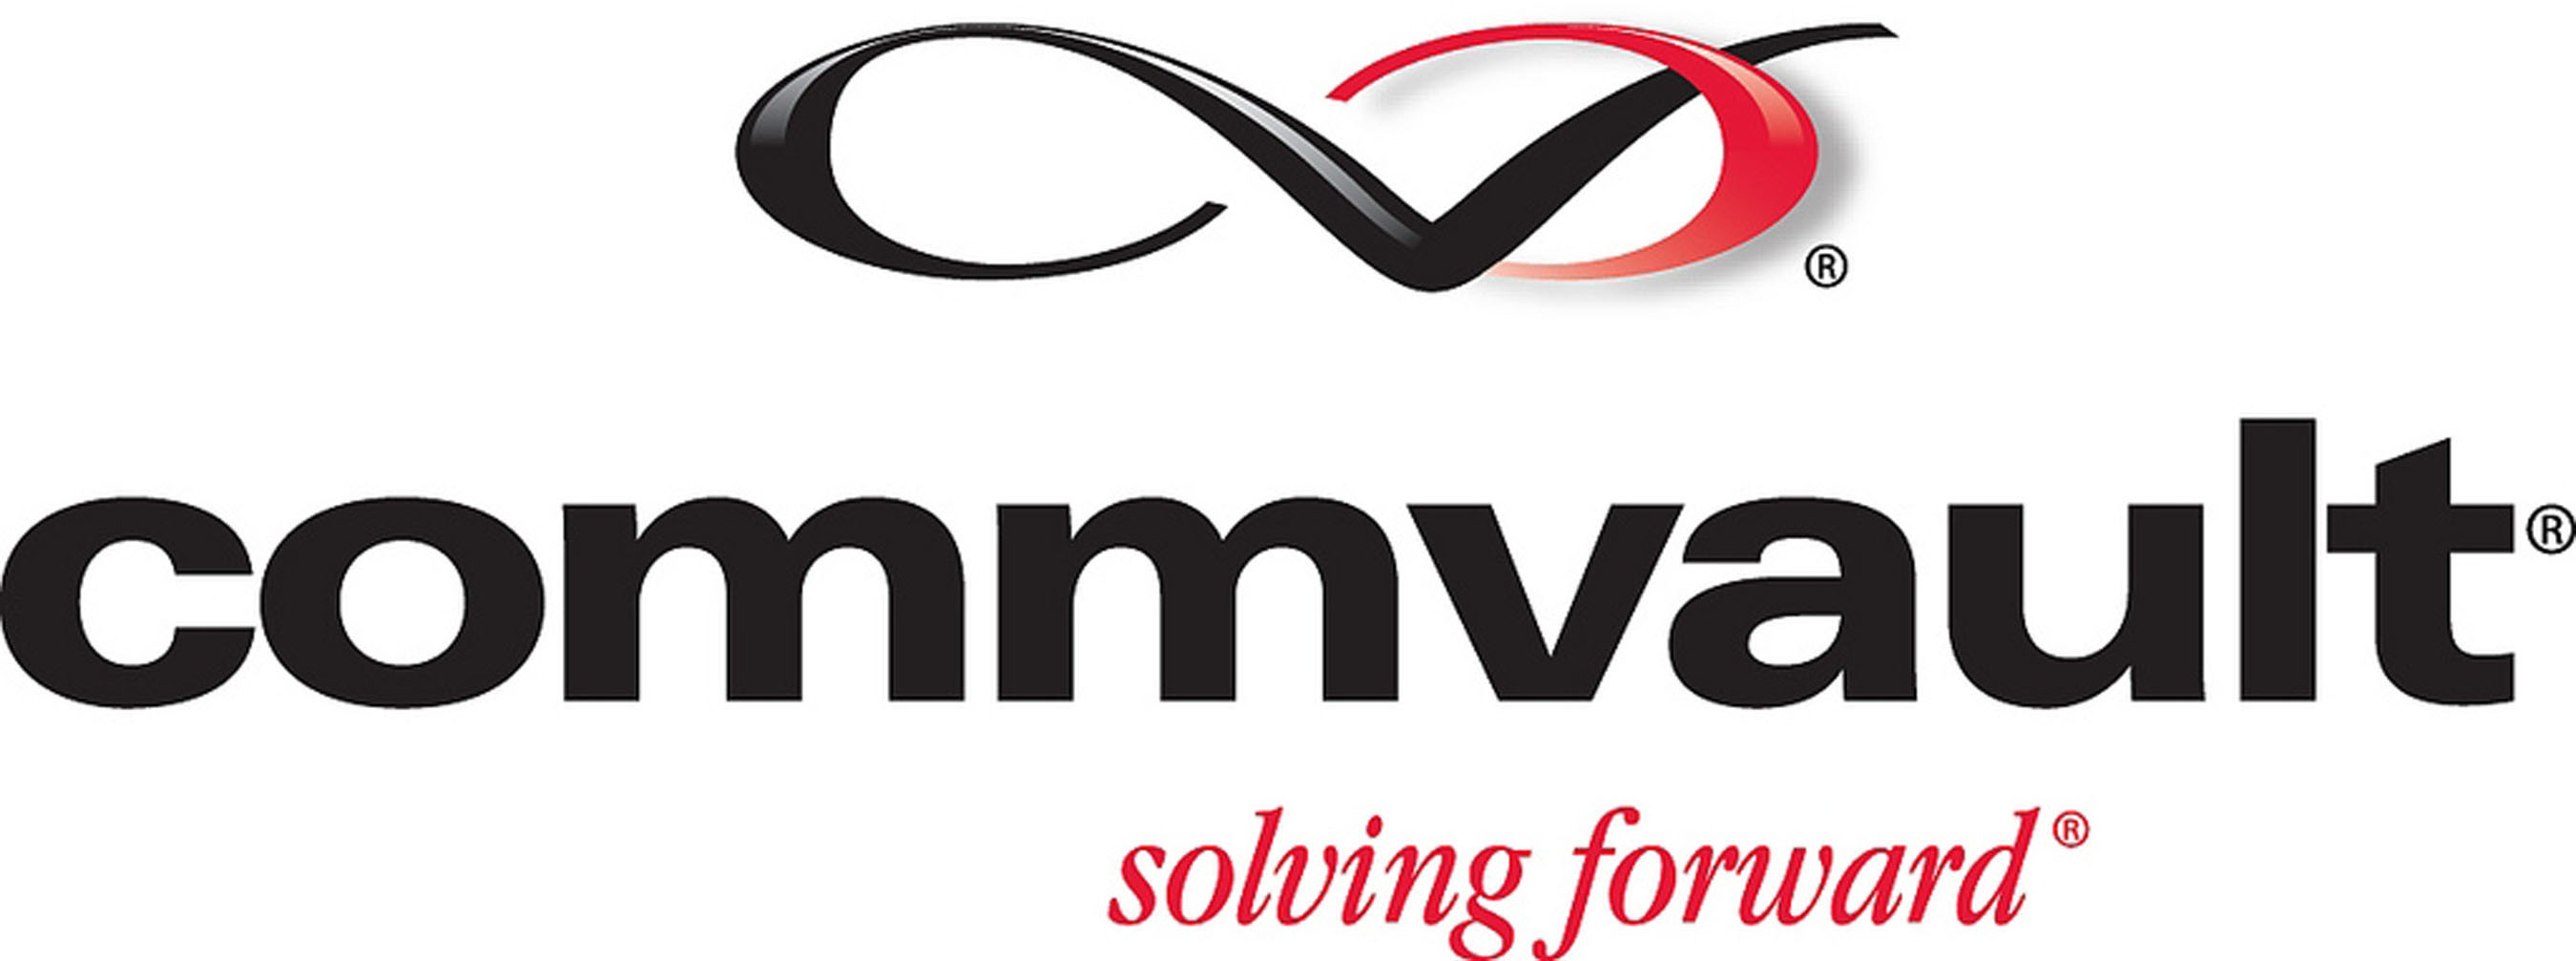 CommVault the leader in modern data and information management software